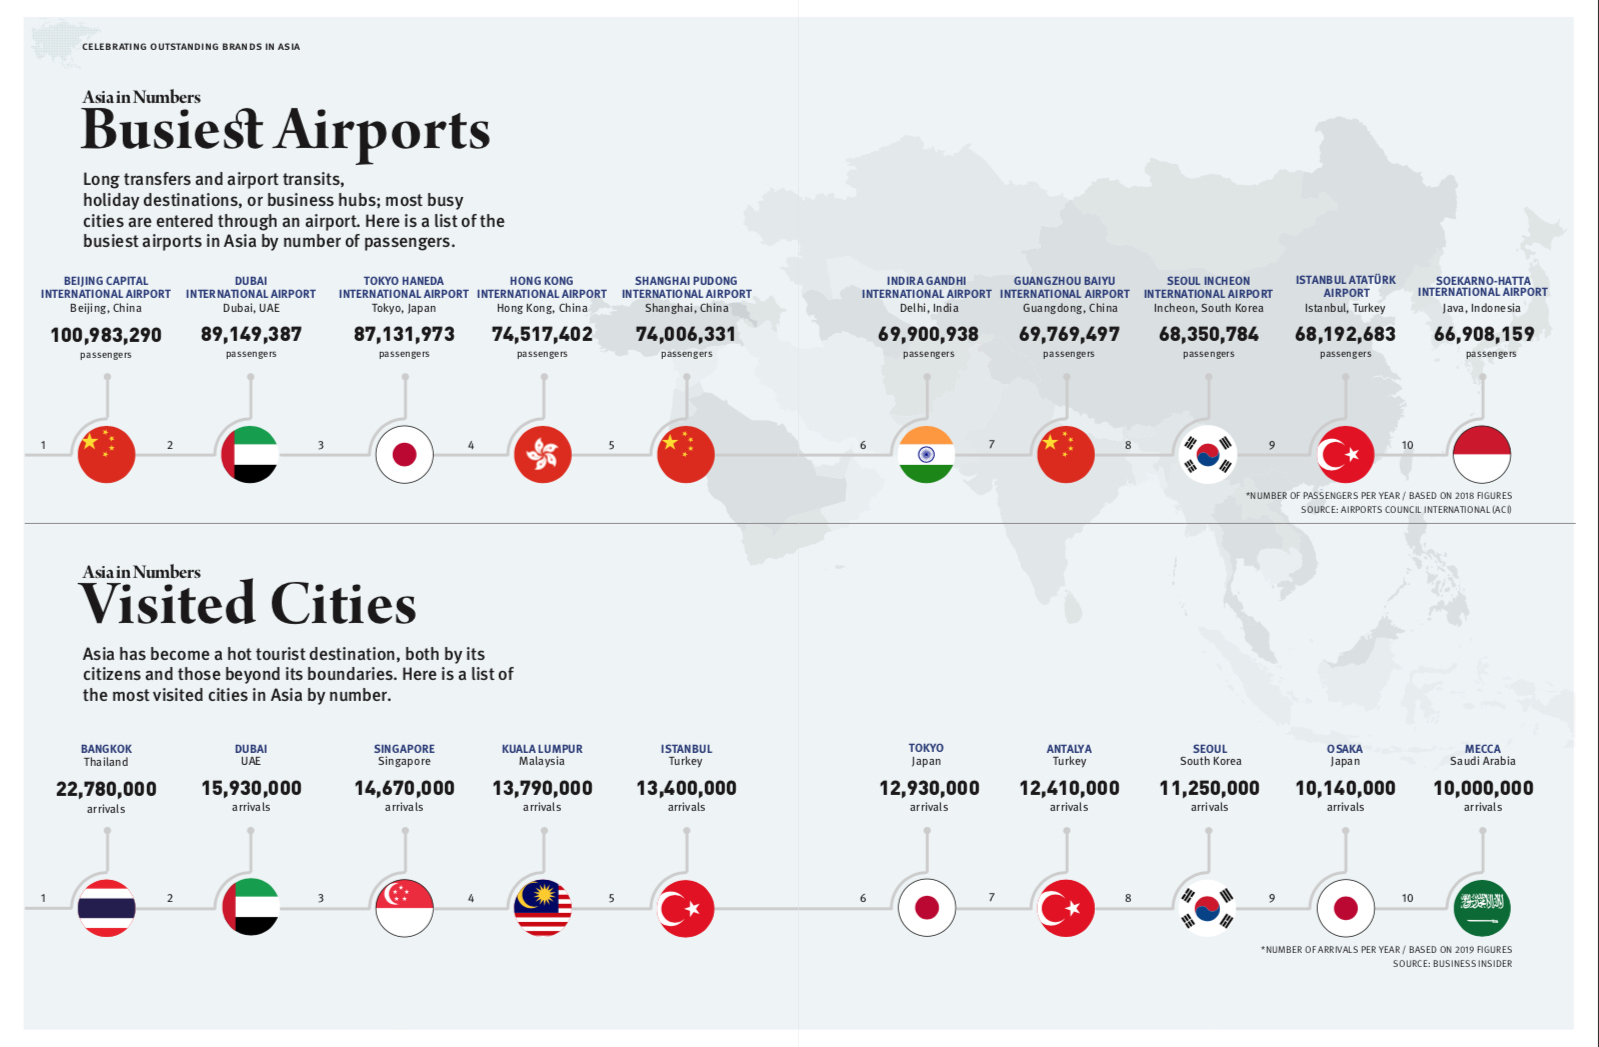 Which is the largest busiest airport in Asia?